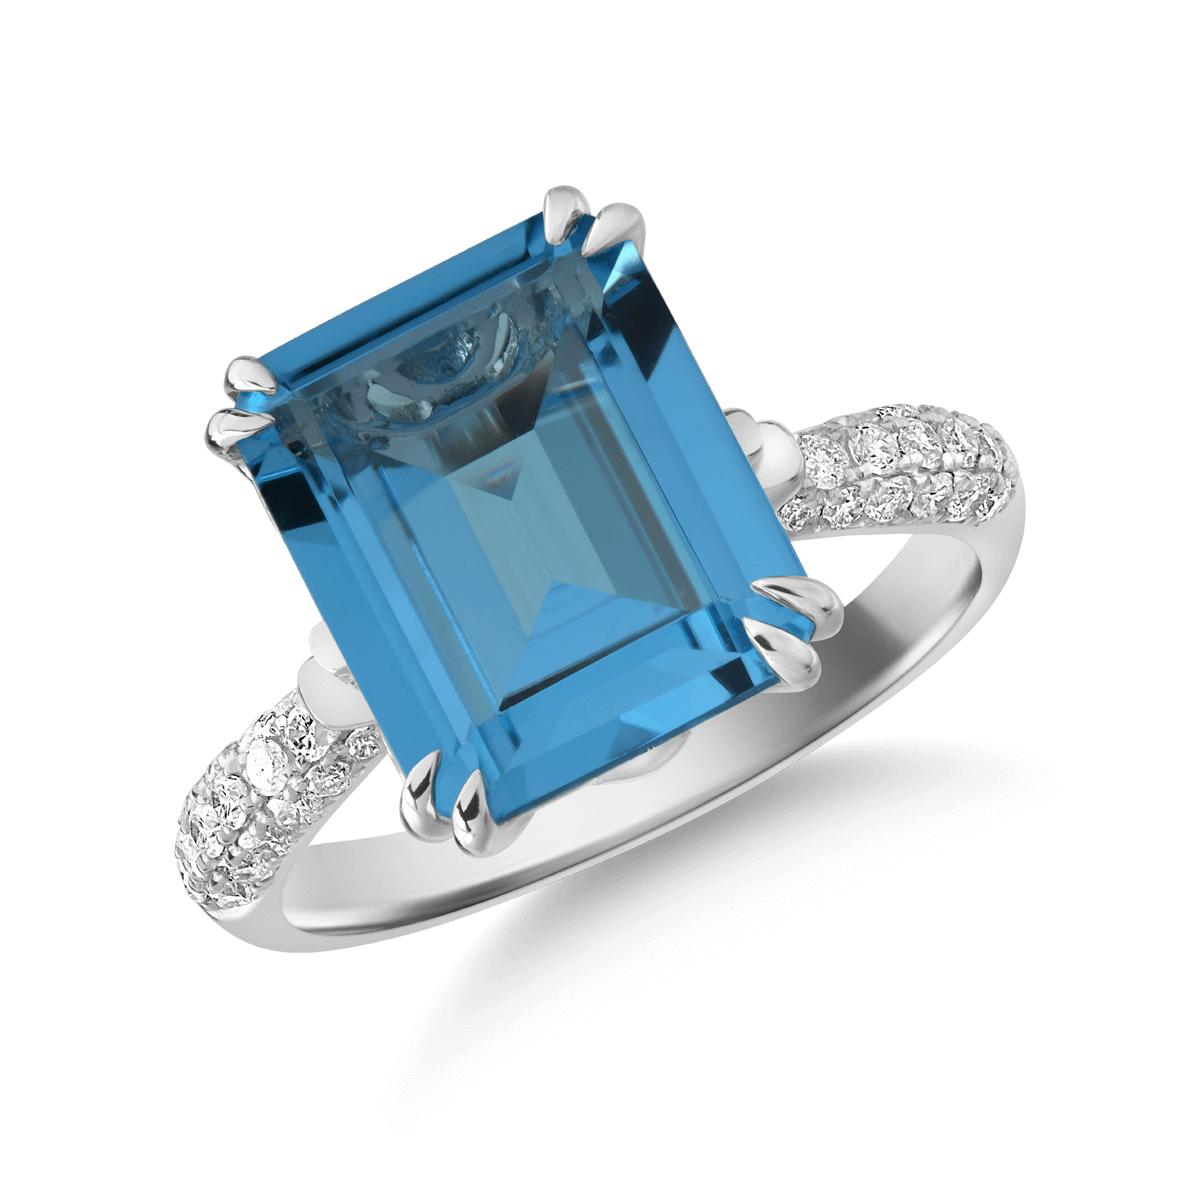 14K white gold ring with 6.87ct blue topaz and 0.337ct diamonds